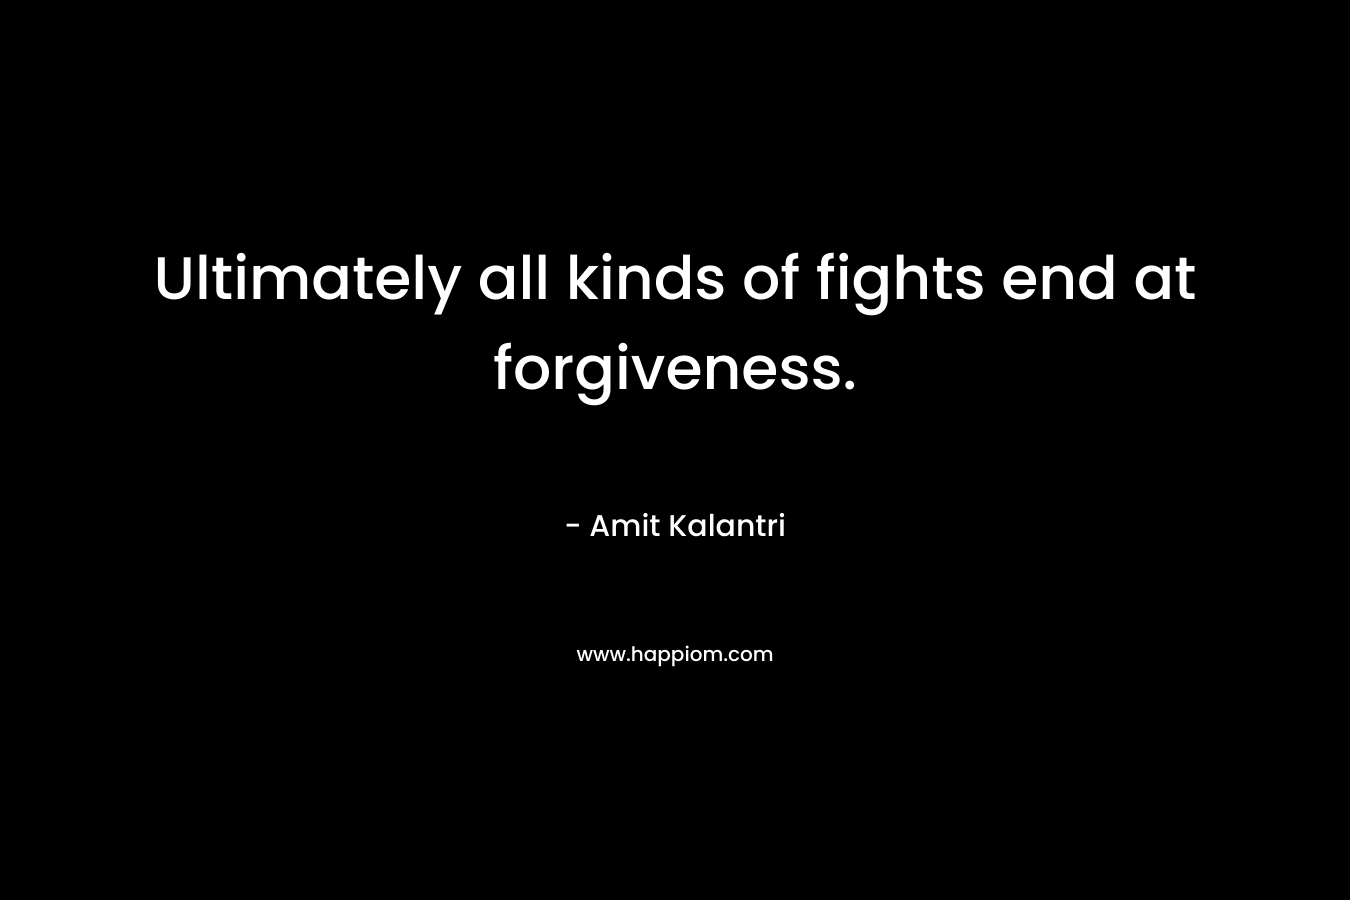 Ultimately all kinds of fights end at forgiveness.